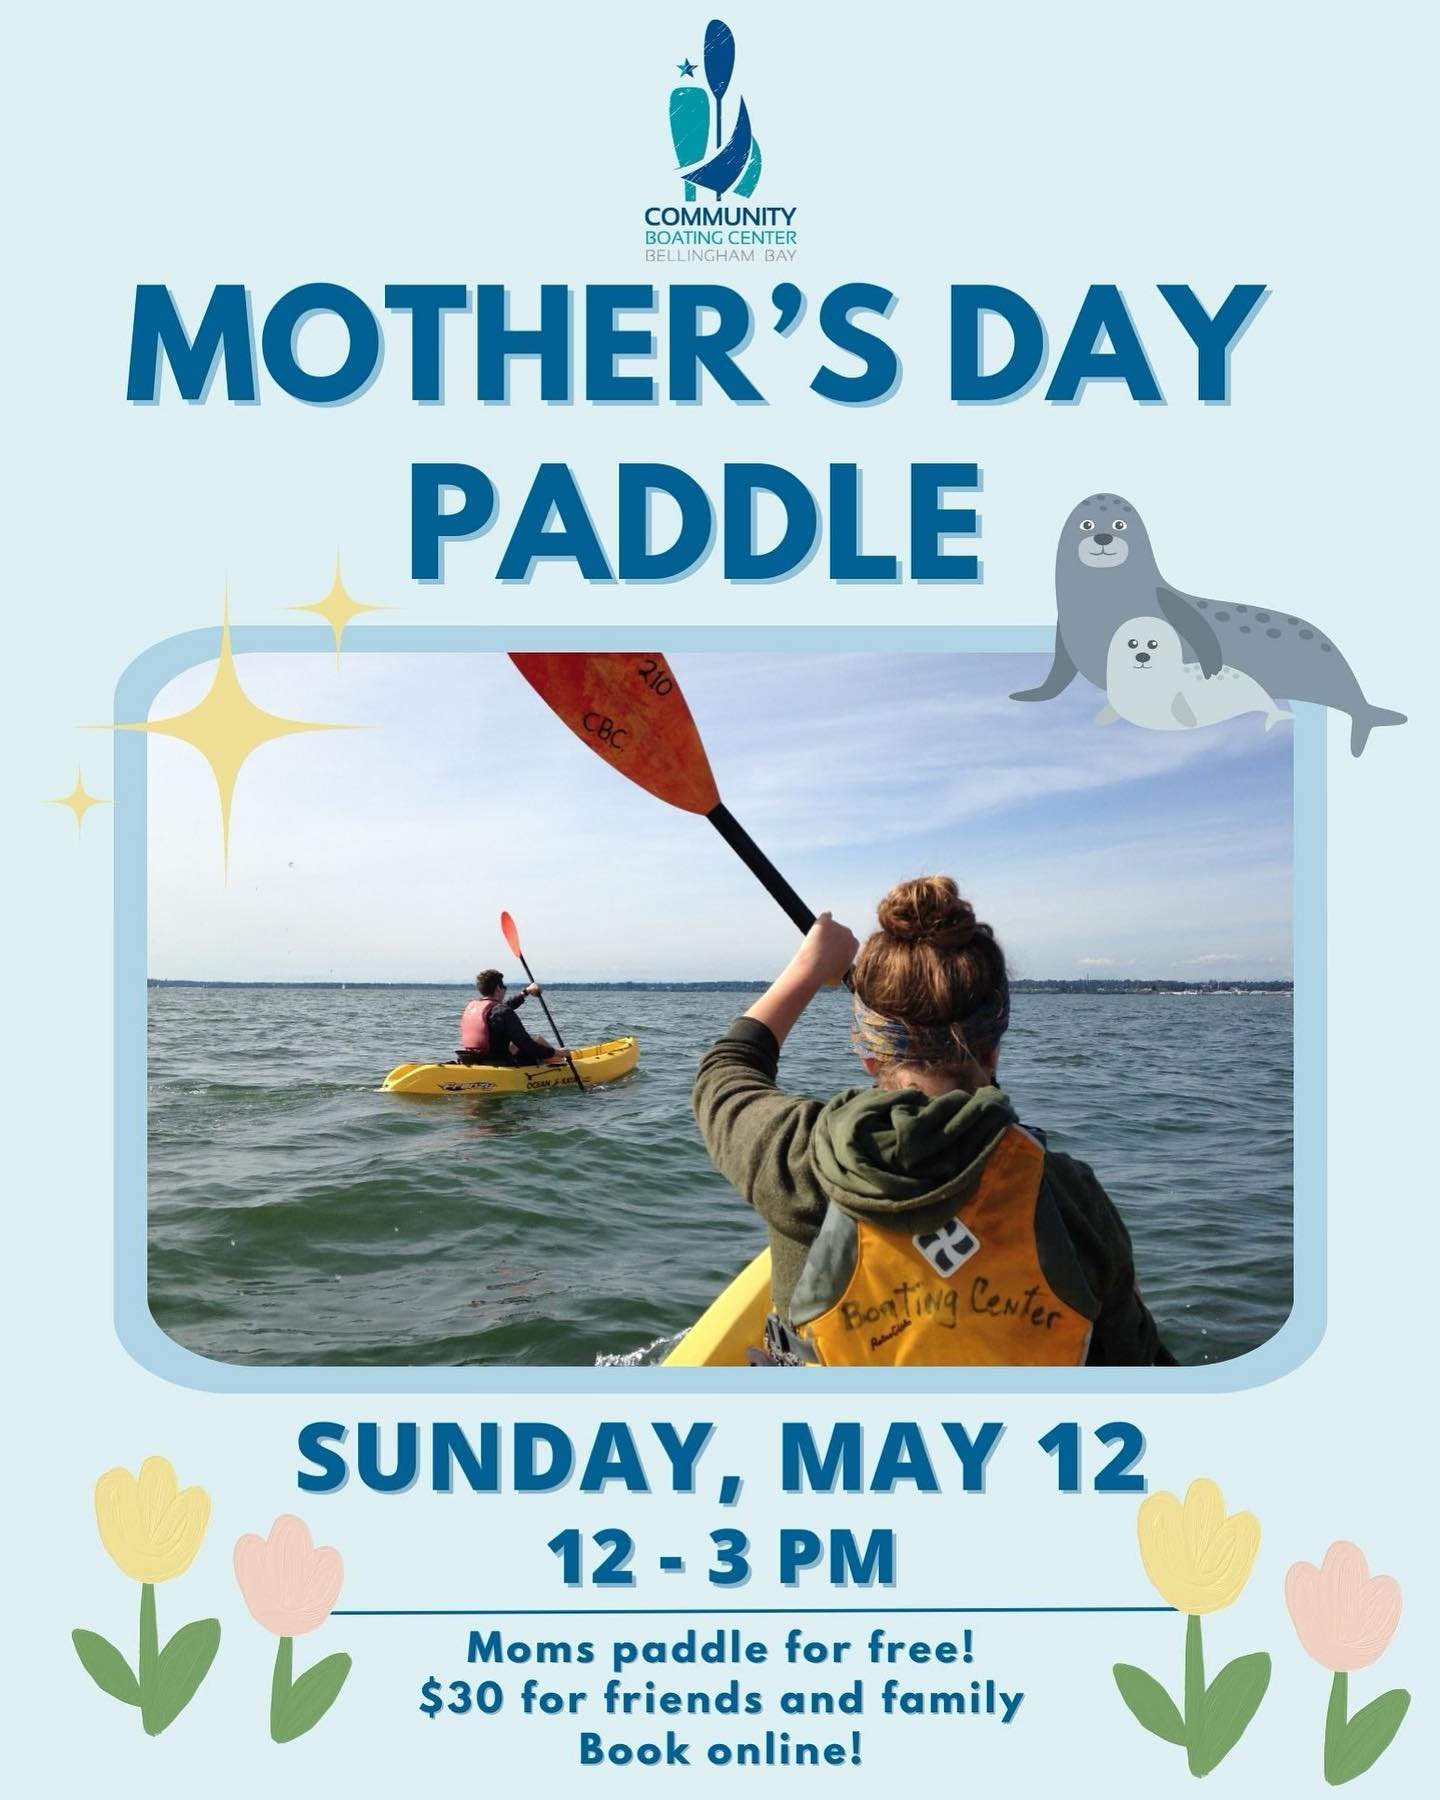 Calling all moms! 🚣🏼&zwj;♂️💕 This year&rsquo;s Mother&rsquo;s Day Paddle is Sunday, May 12th, from 12 PM - 3 PM. 

Everyone is welcome! No experience necessary. Bring your friends and family to celebrate one of our favorite holidays 👩&zwj;👧&zwj;